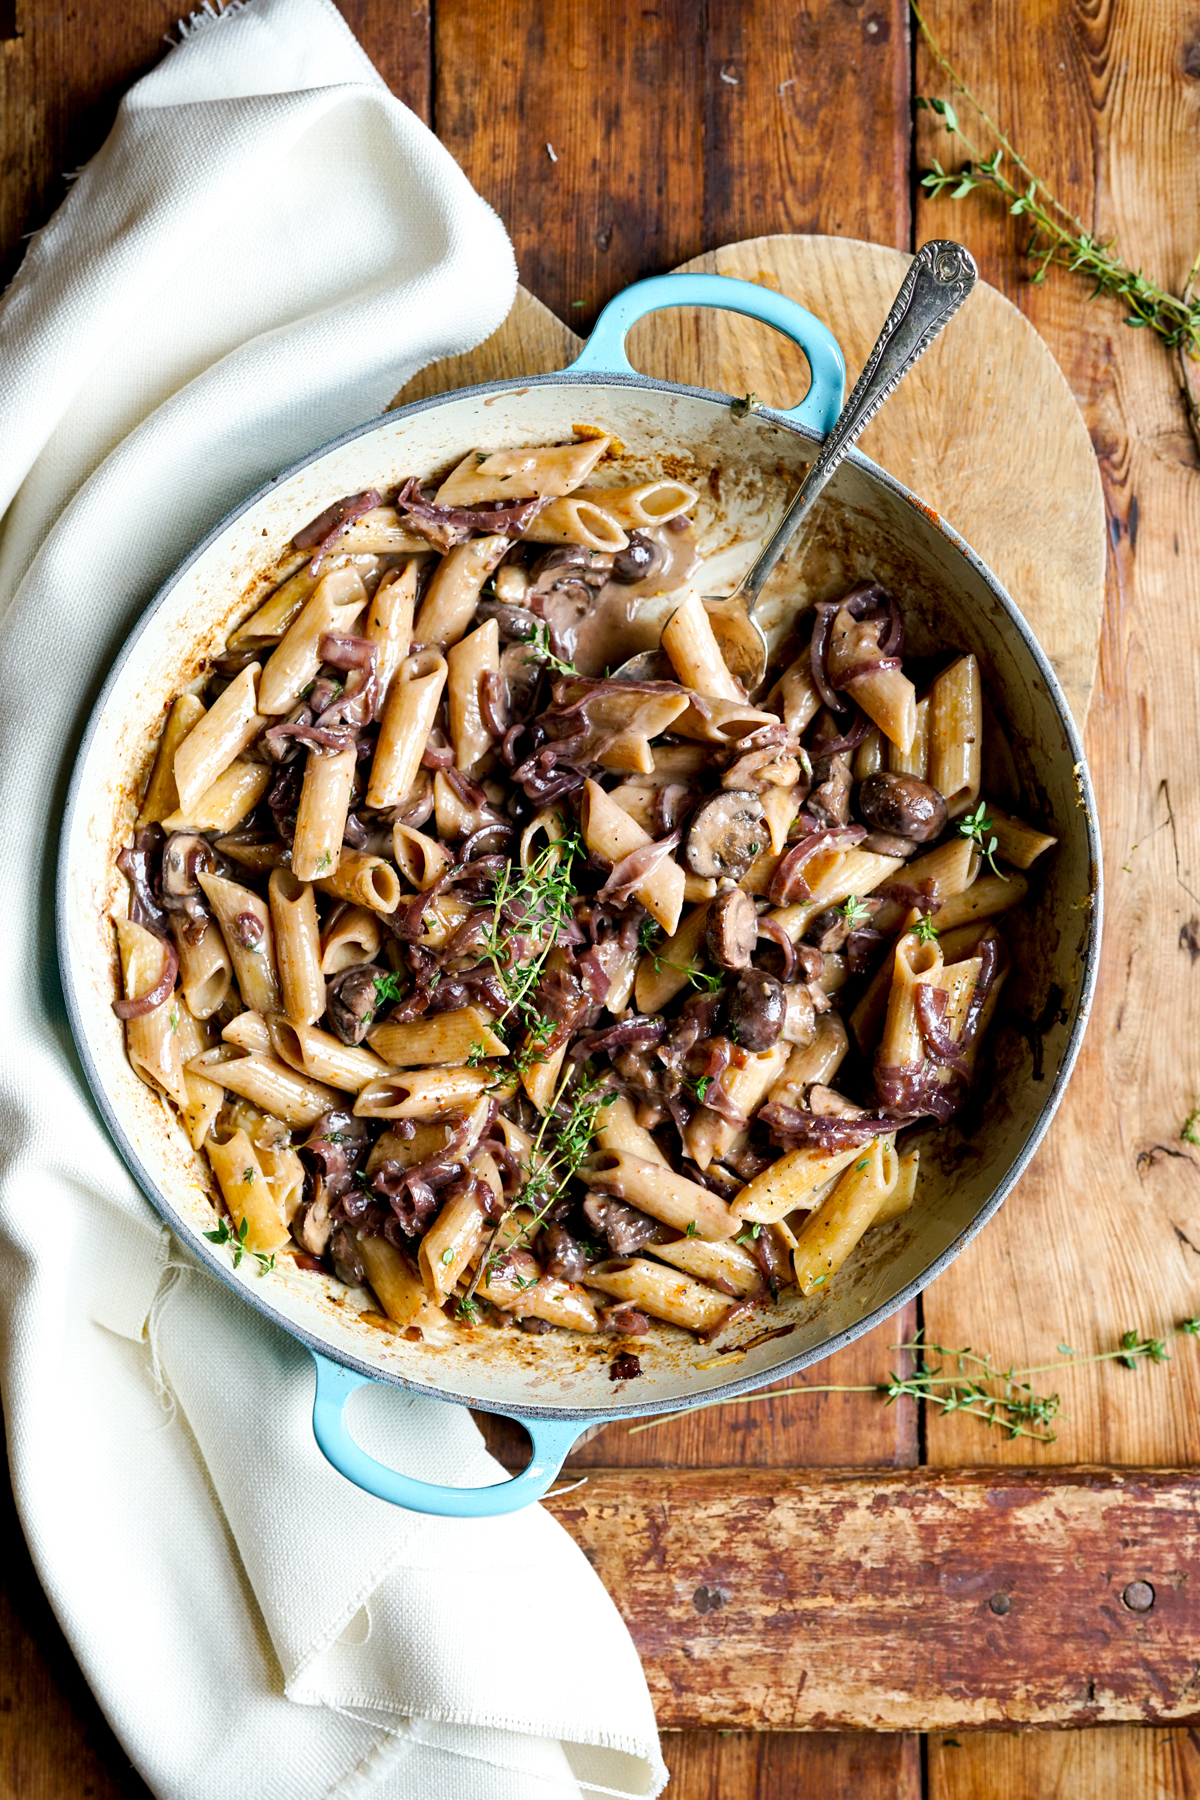 Tasty rustic french onion and mushroom dish recipe in cast iron pan